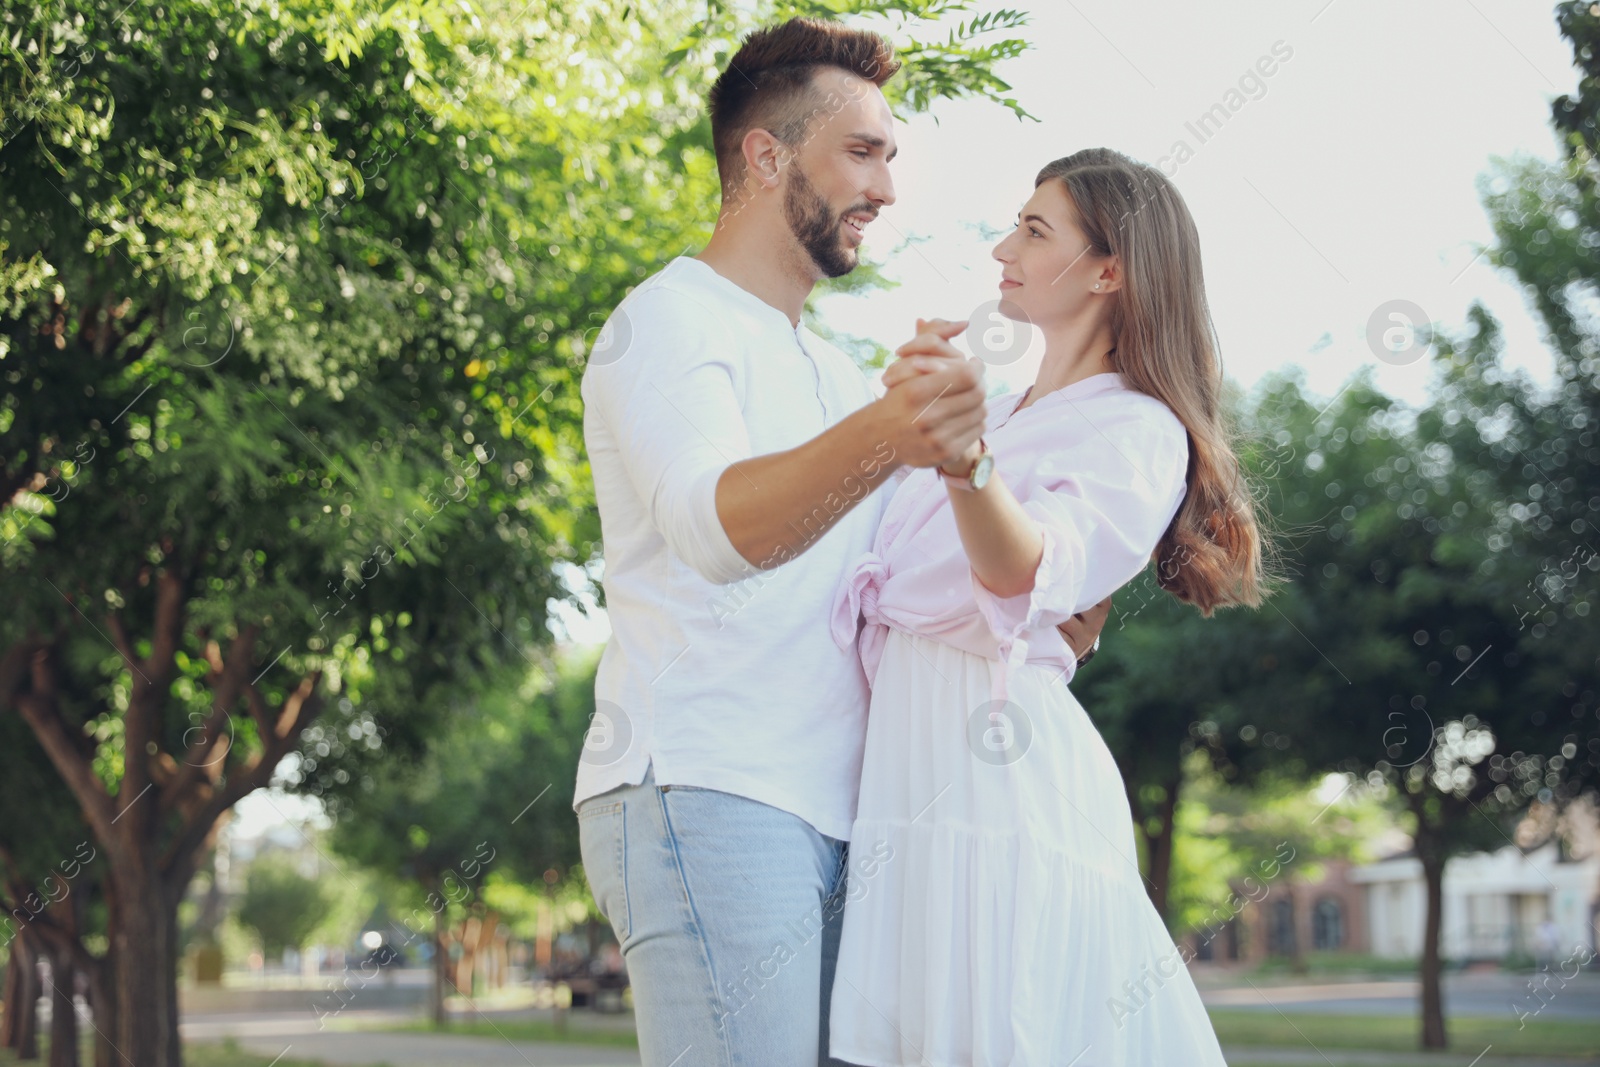 Photo of Lovely young couple dancing together in park on sunny day